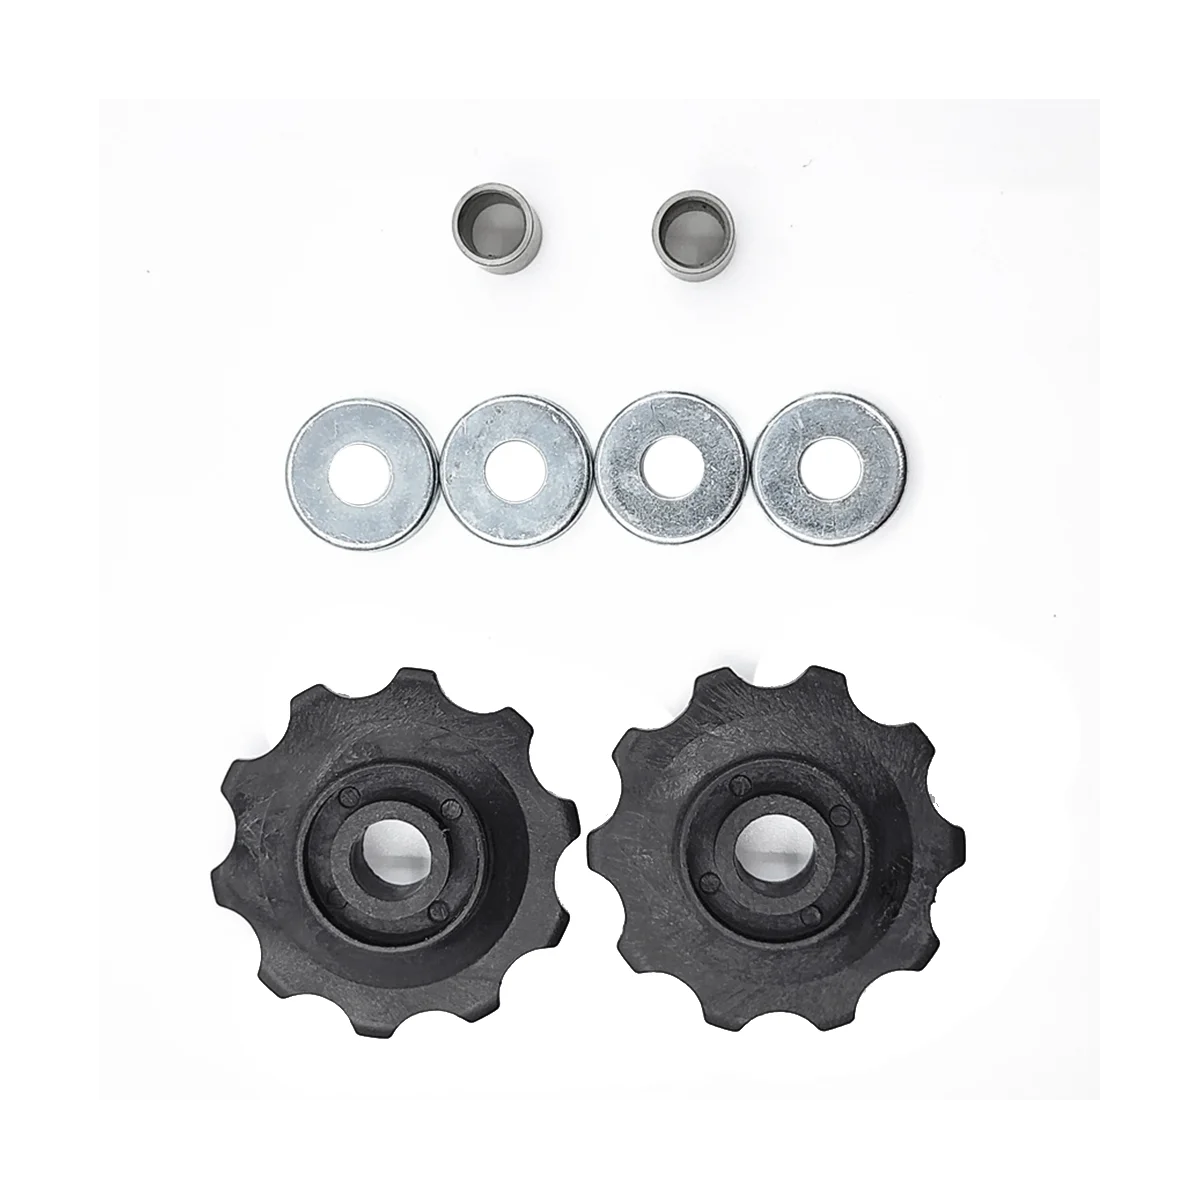 

6MM Pulley Rear Derailleur Conversion Kit Wheel Bolts for Vintage or